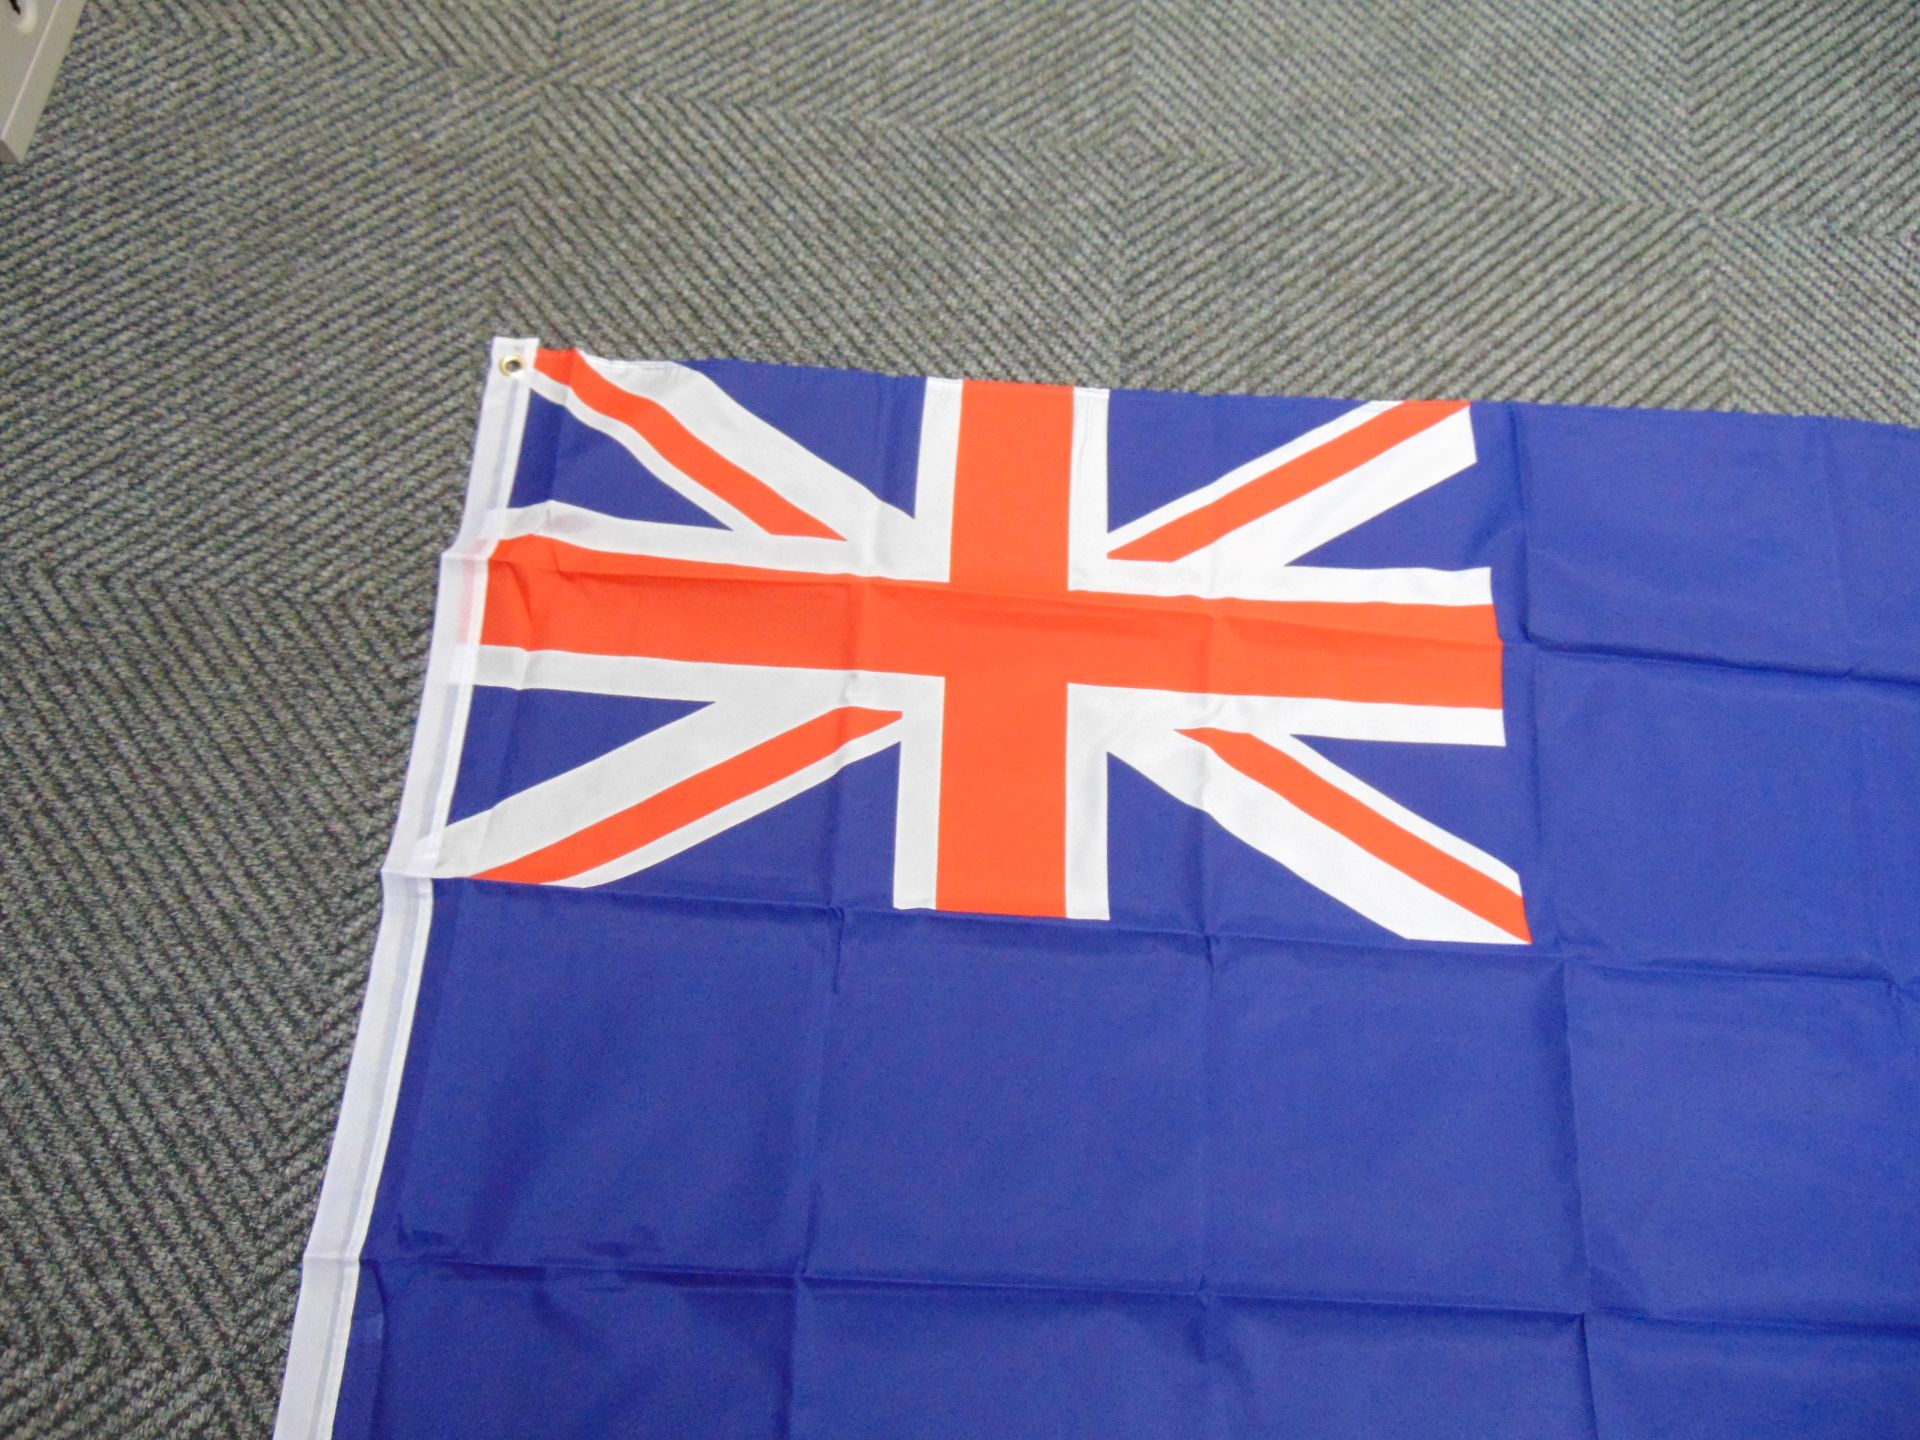 Blue Ensign Flag - 5ft x 3ft with Metal Eyelets. - Image 3 of 6